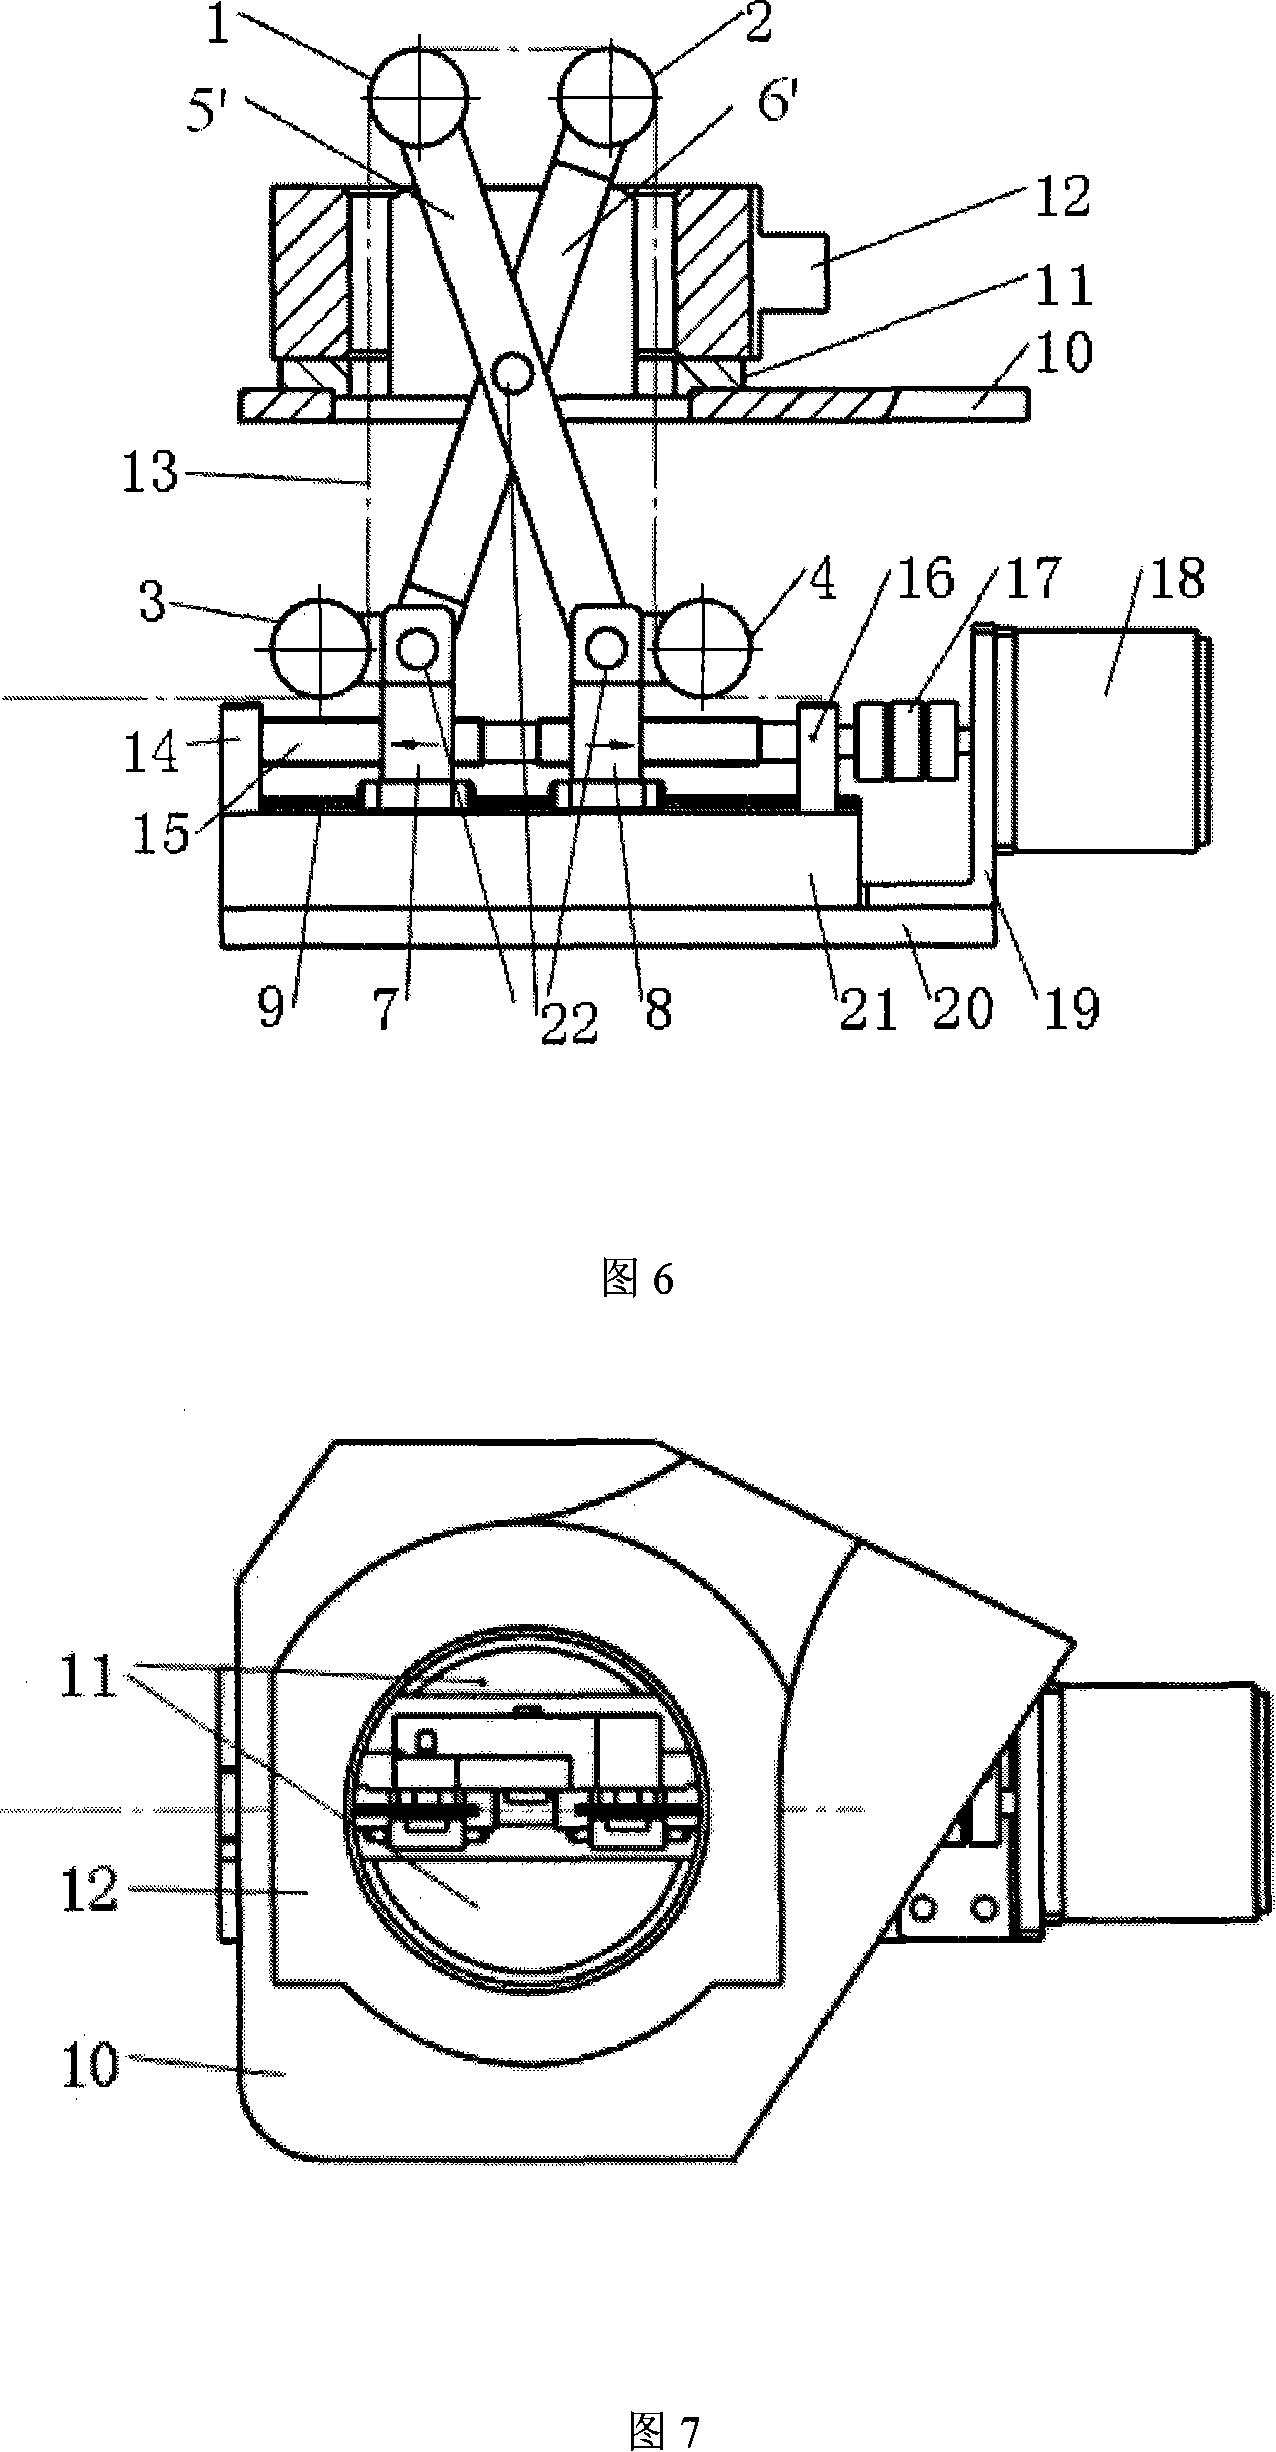 Cracking connecting-rod initial stress trough two-way processing device